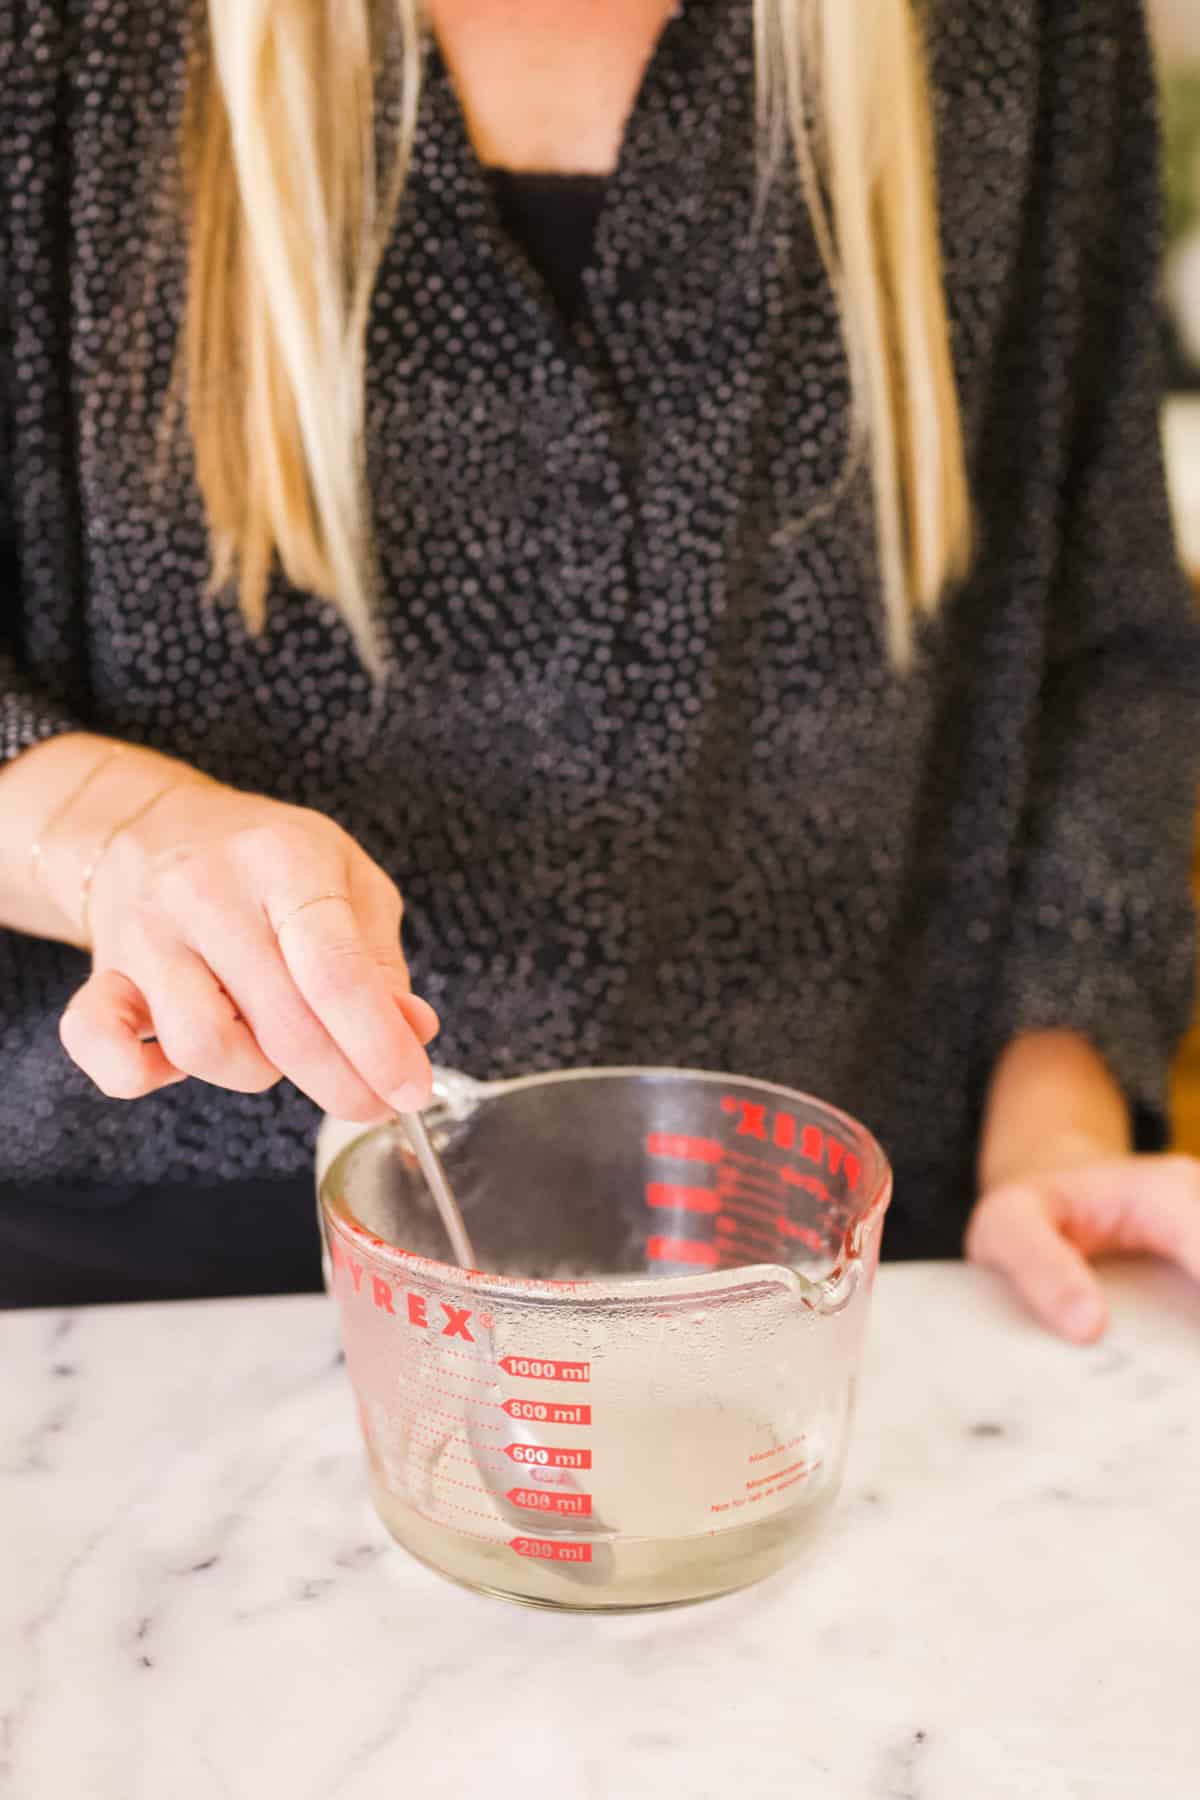 Woman stirring simple syrup in a glass measuring cup.